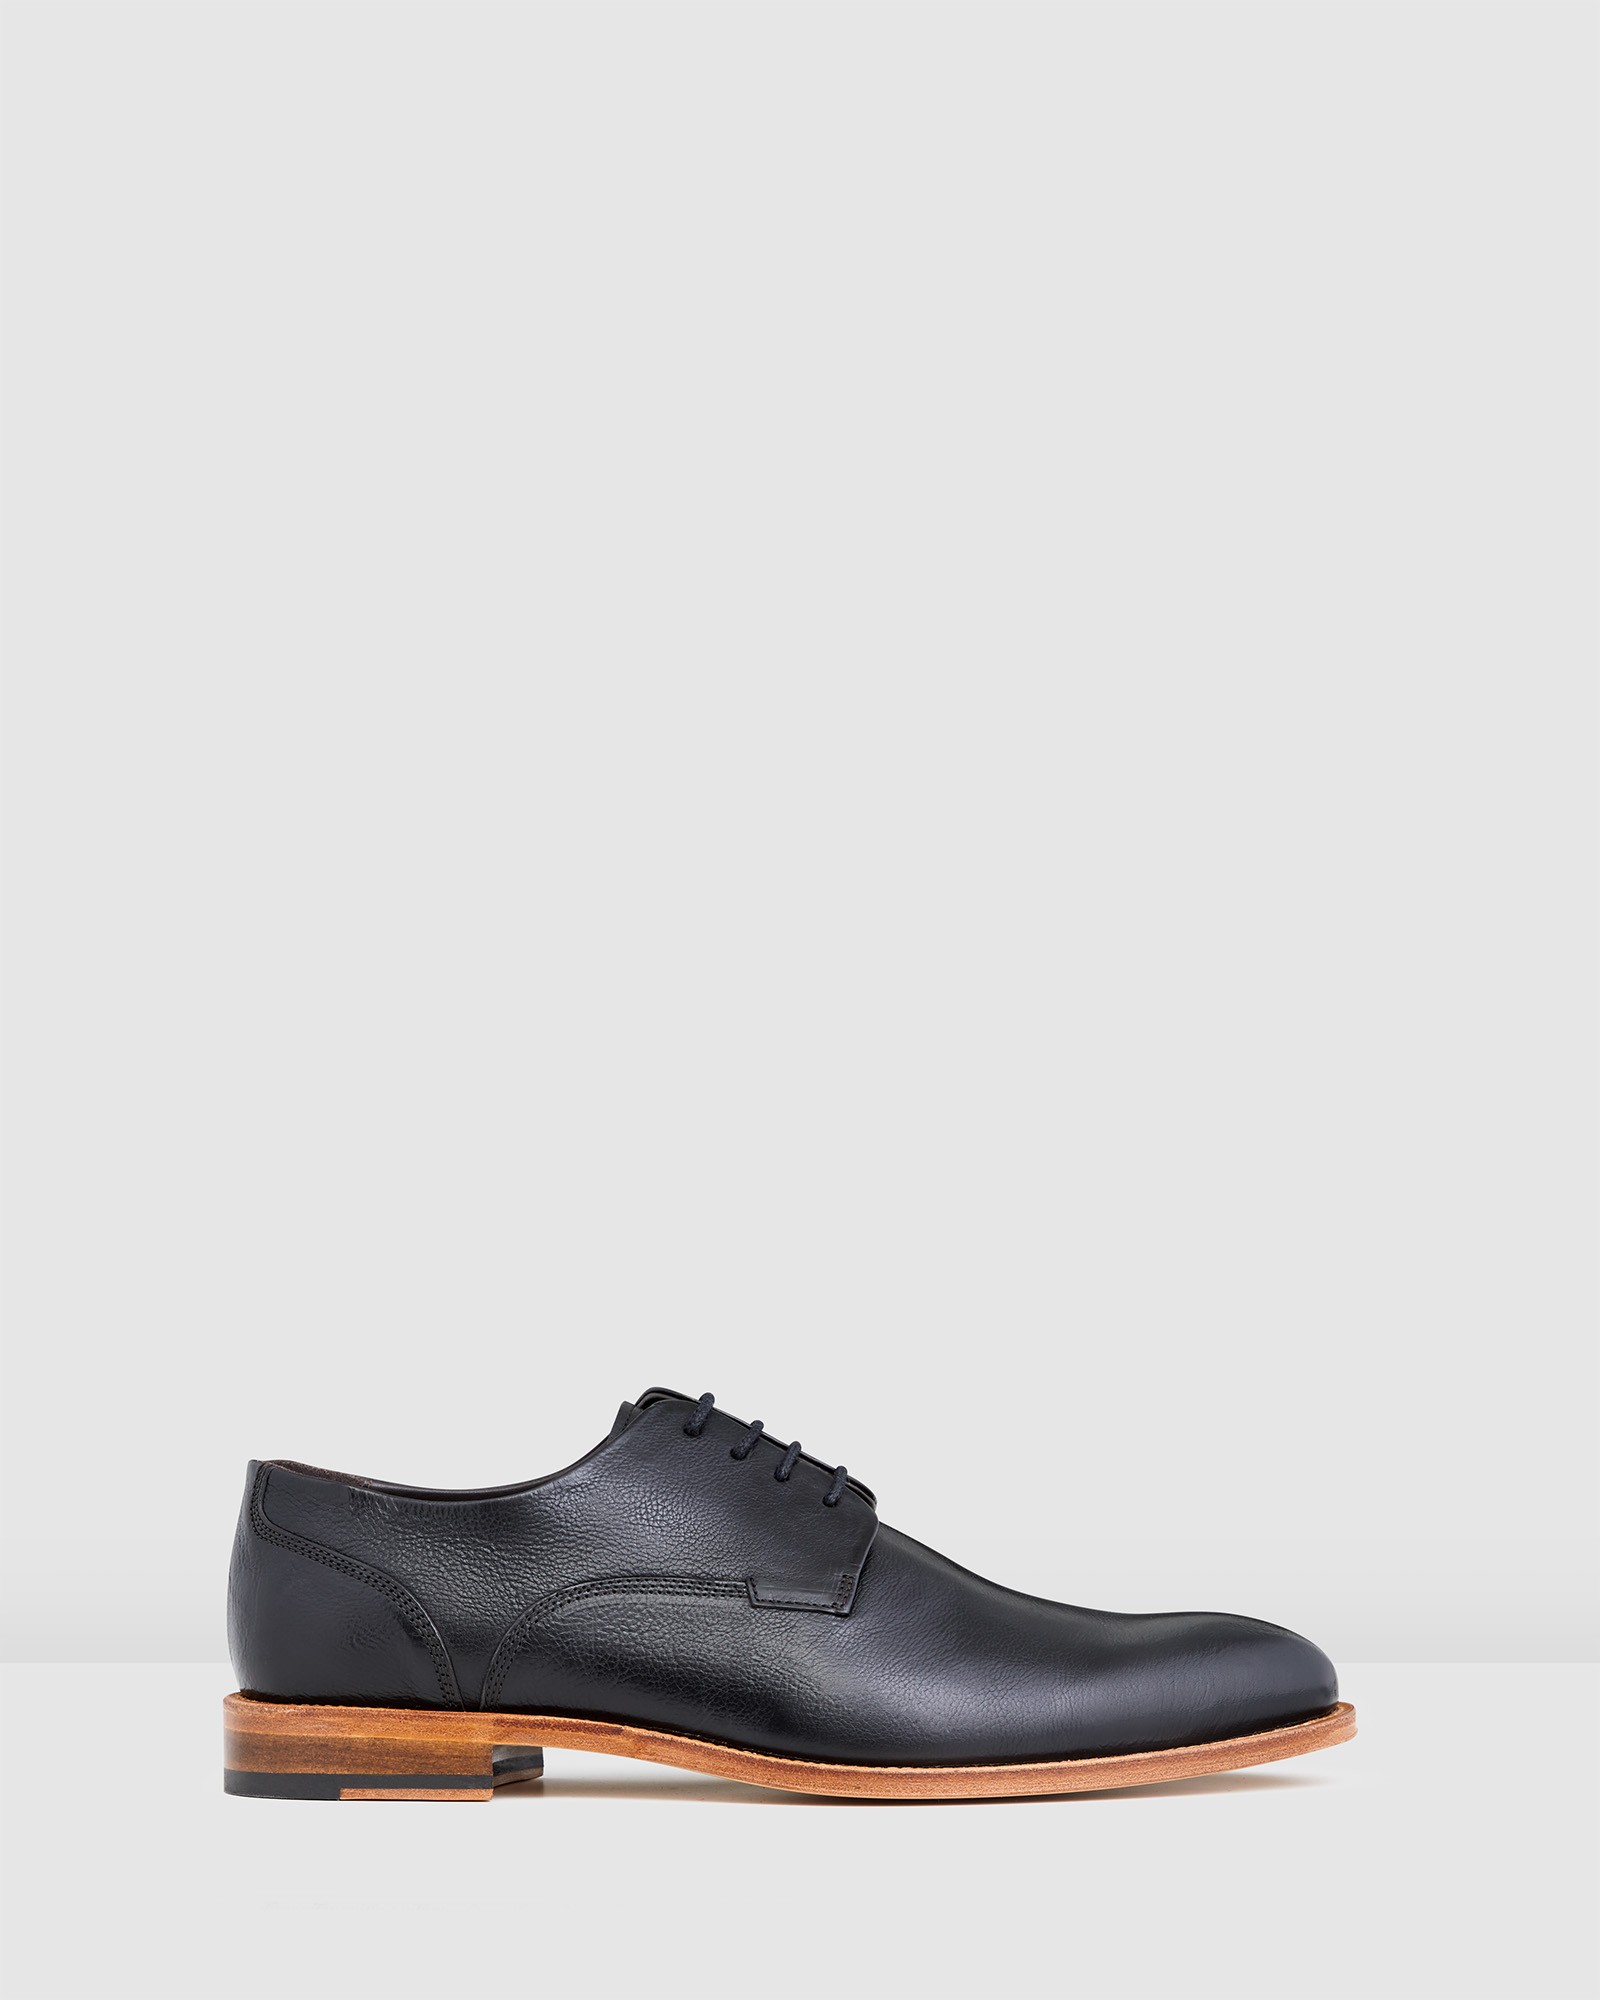 Kennard Lace Ups Black by Aquila | ShoeSales